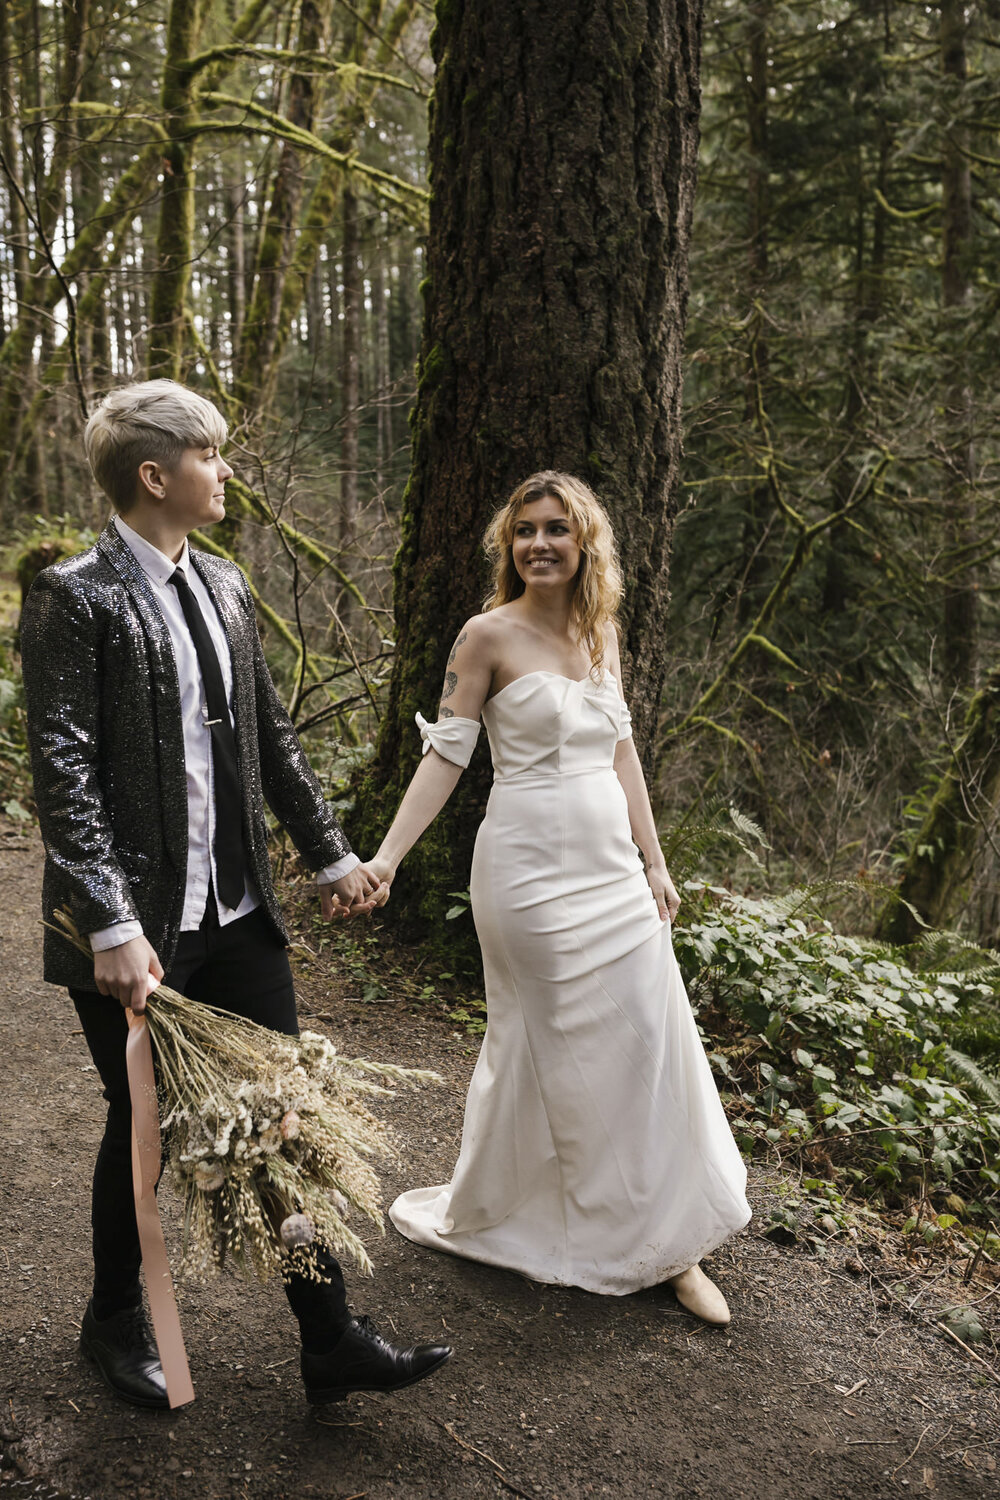 Same sex couple, one wearing a white wedding dress, the other wearing a sequined jacket walk in a Washington forest for their elopement in the PNW